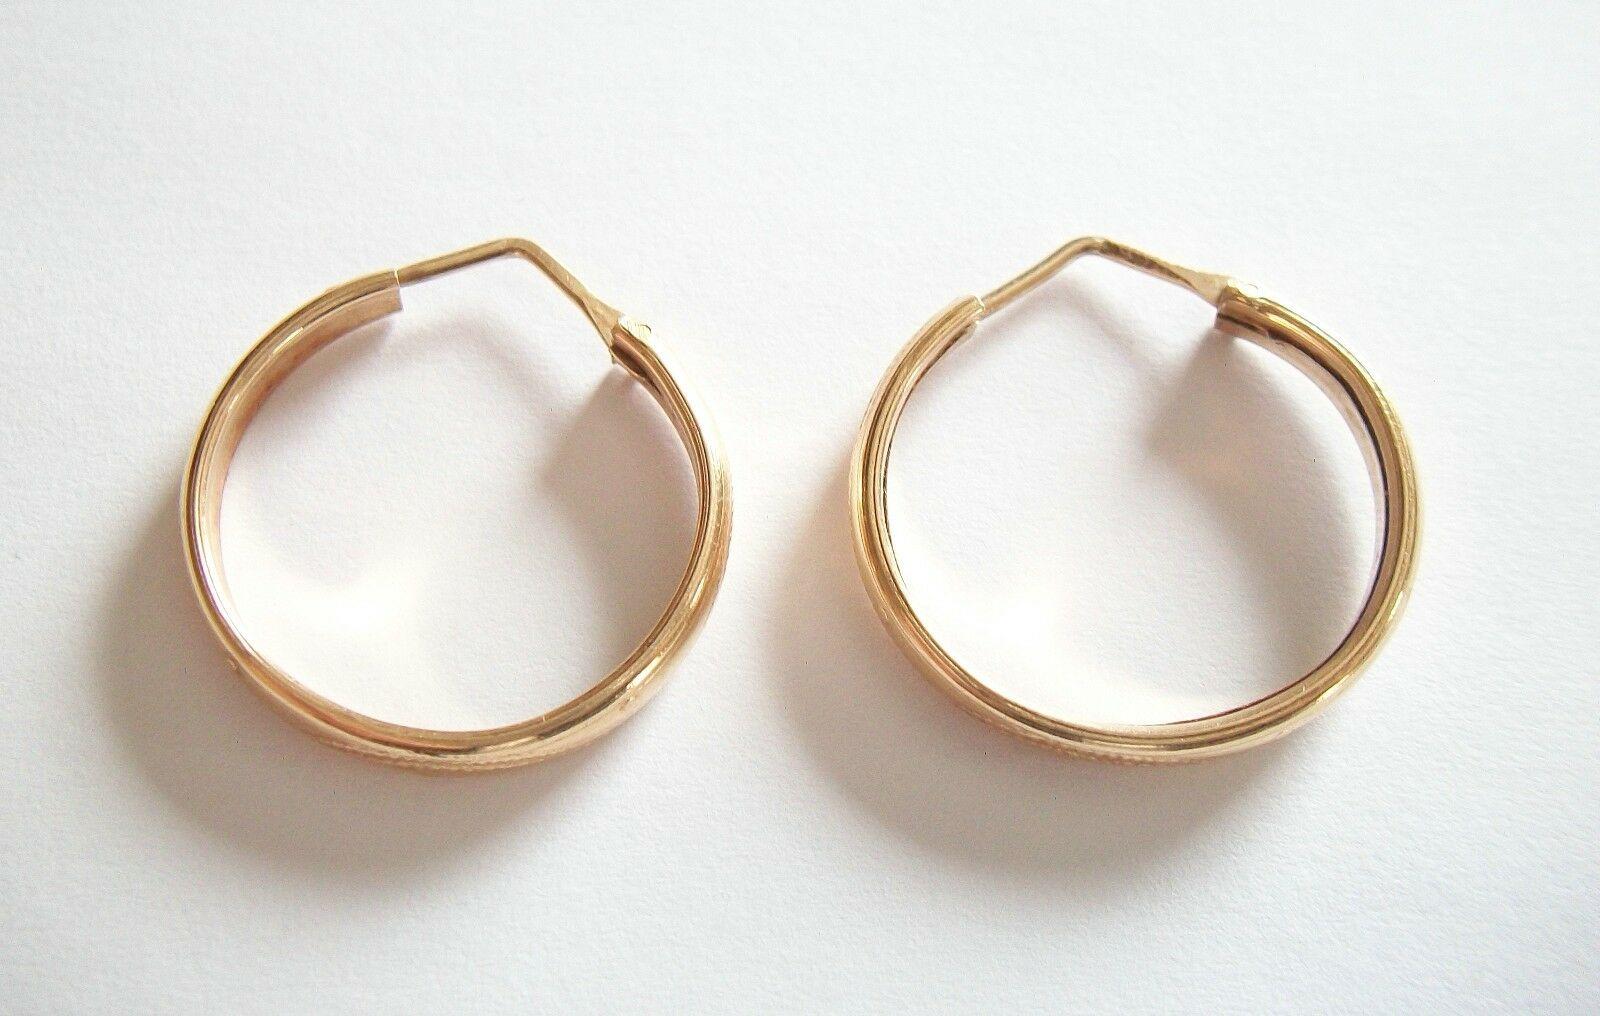 Vintage Vicenza 14K Gold Hoop Earrings, Hand Made, Italy, Mid 20th Century For Sale 2